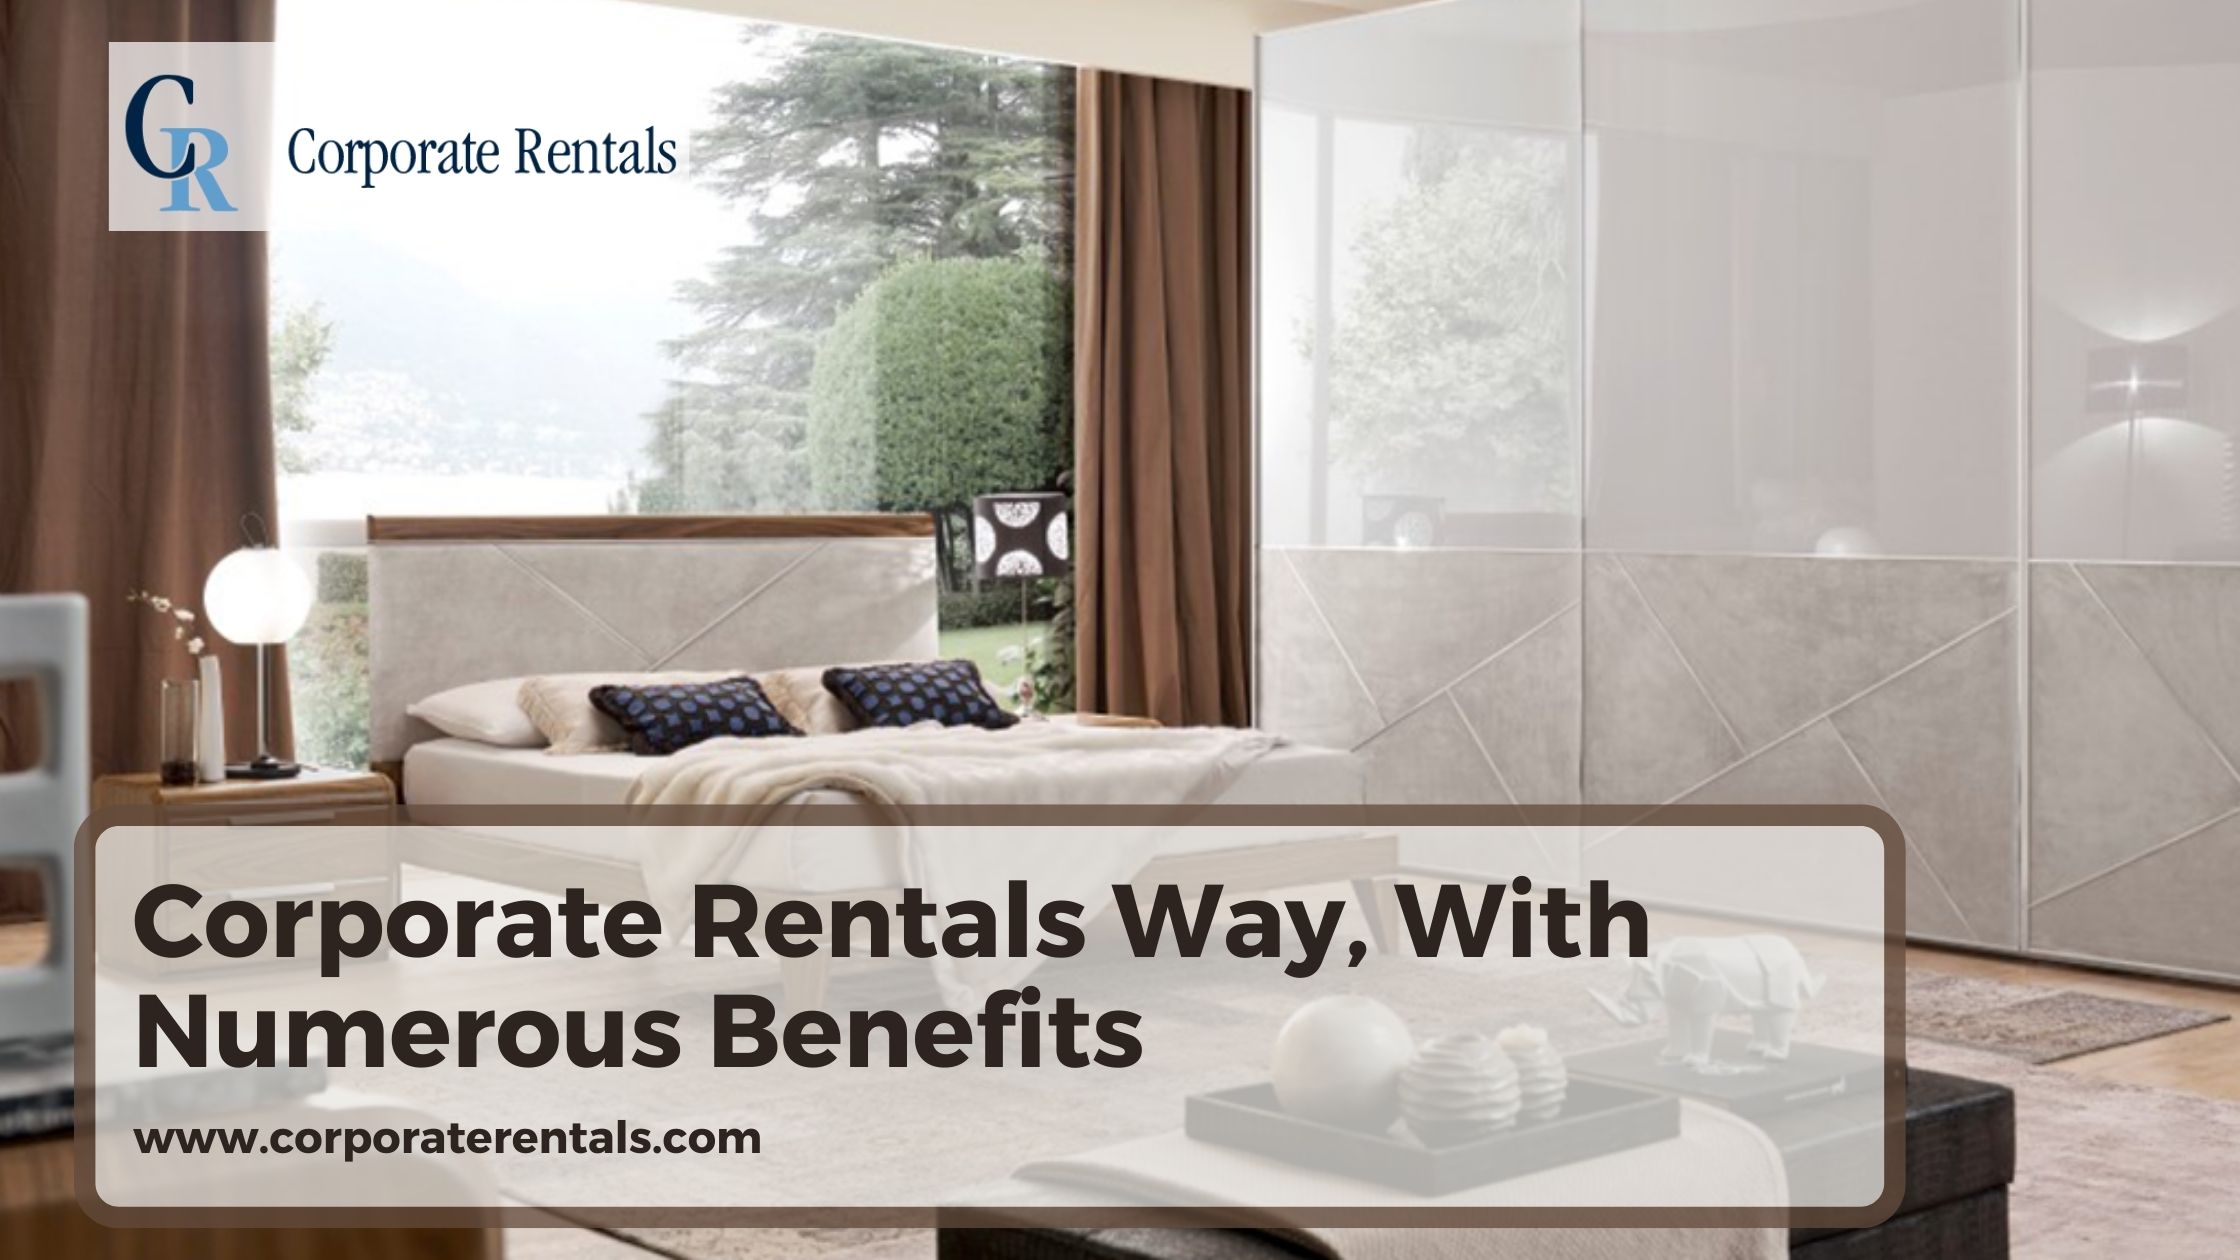 Furnish Your Apartment, The Corporate Rentals Way, With Numerous Benefits